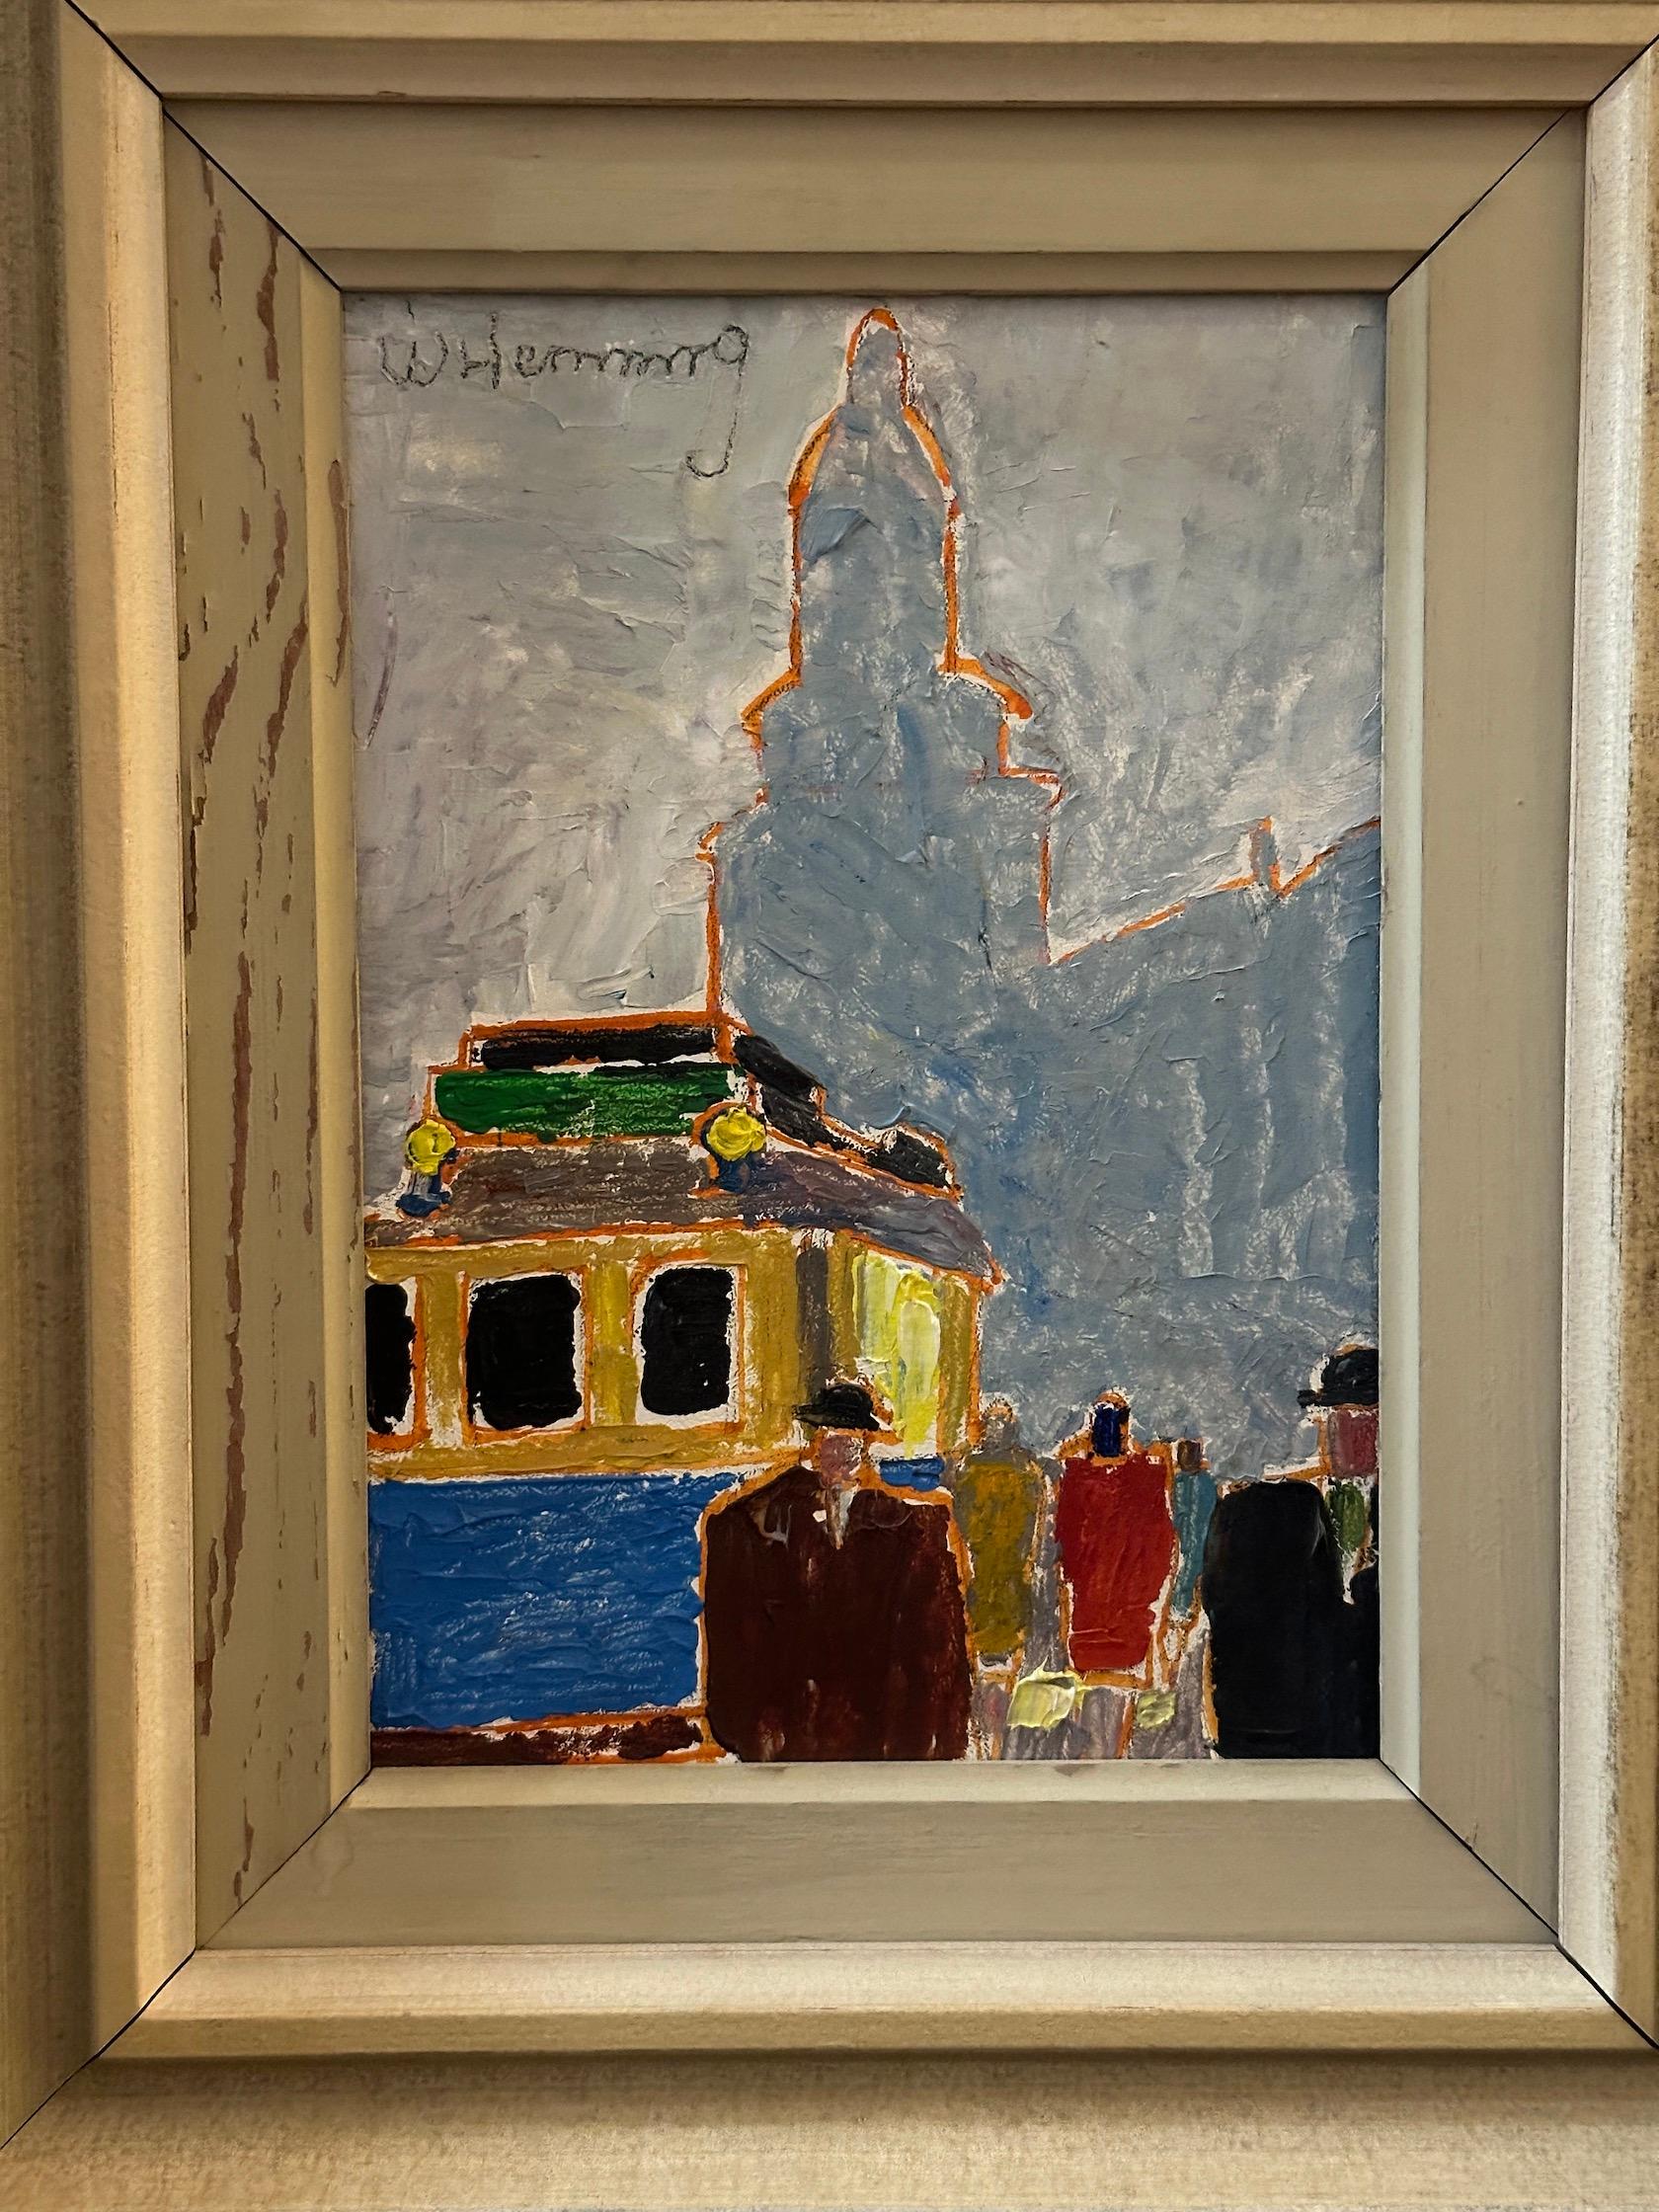 Modernist Mid century Swedish tram and figure scene in Fauvist colors - Painting by Wilhelm Henning